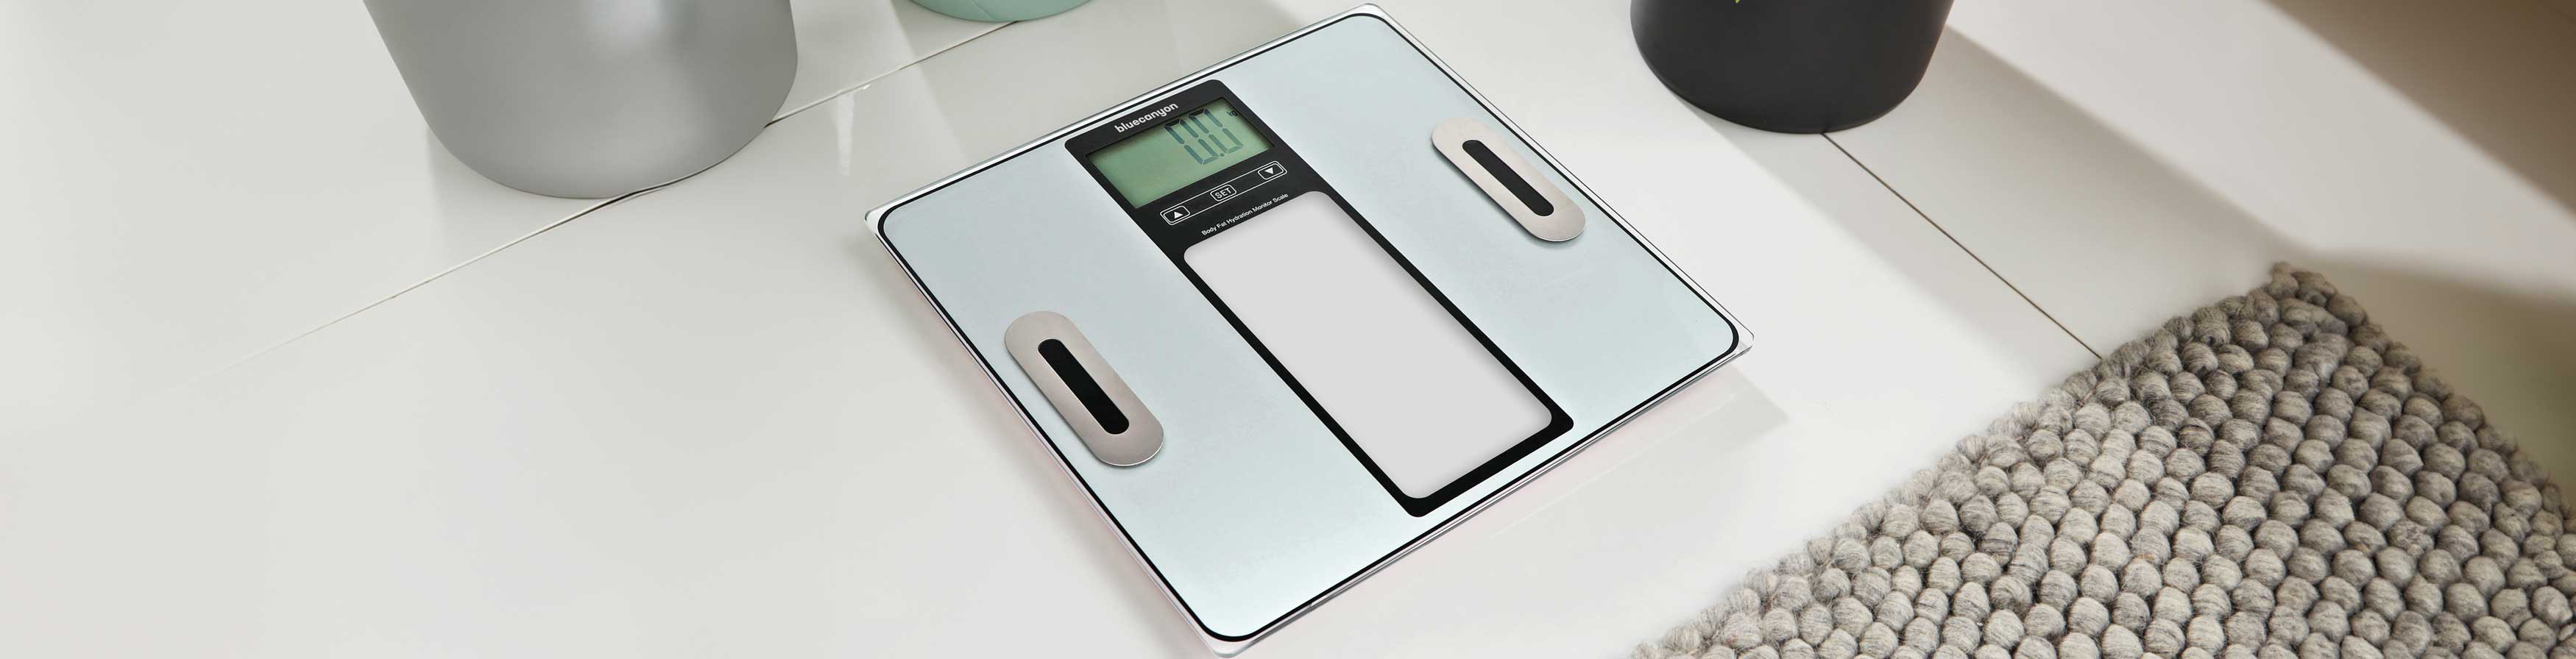 Digital Scales Product